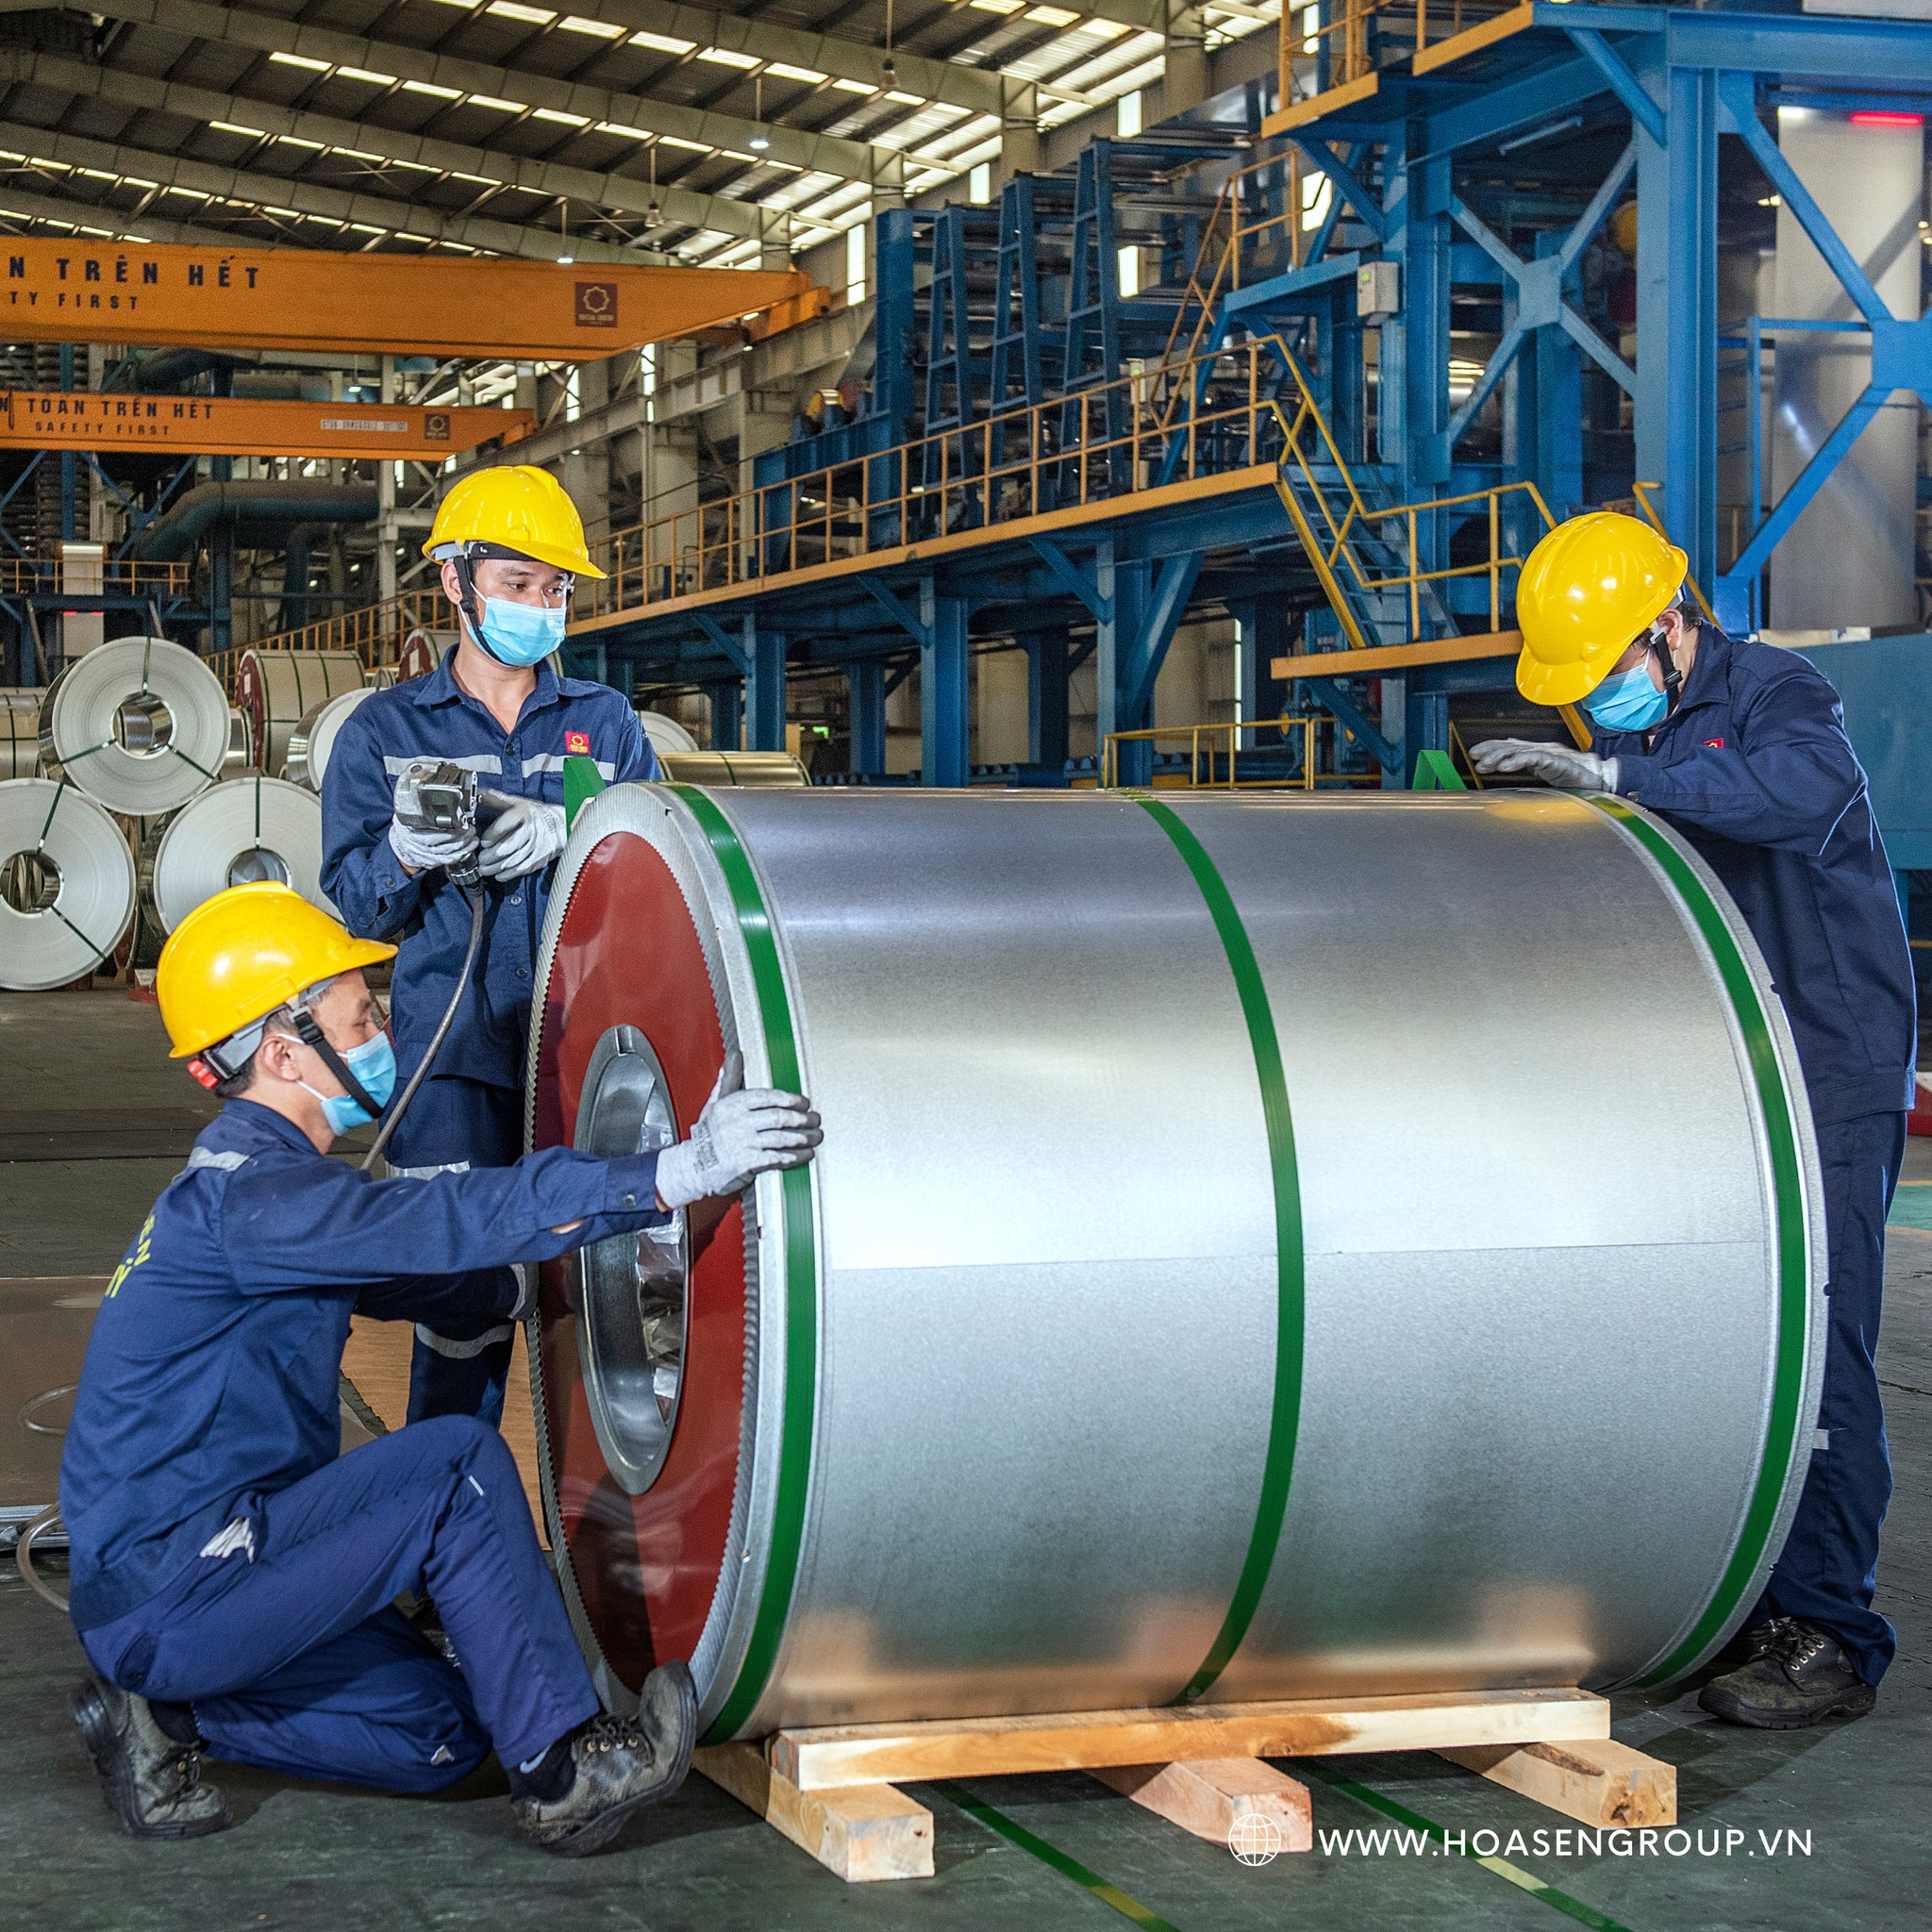 Protecting the steel sheet rolls as much as possible during transportation and storage with many layers of protection